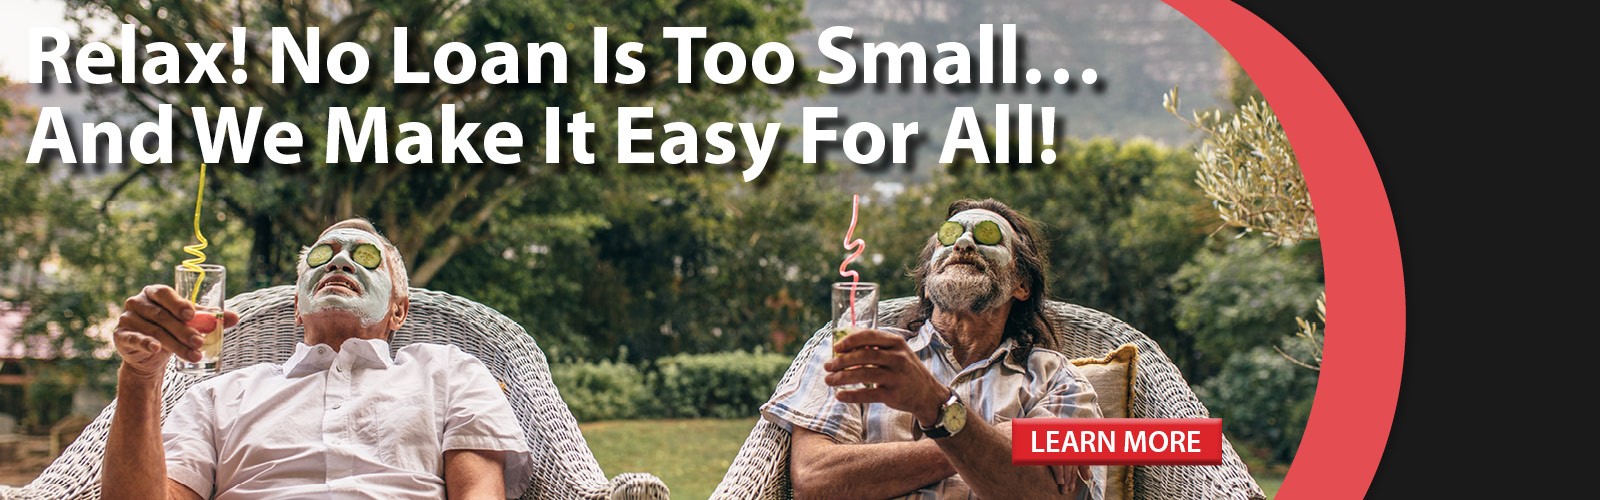 Relax! No loan is to small....and we make it easy for all! Click here to learn more!